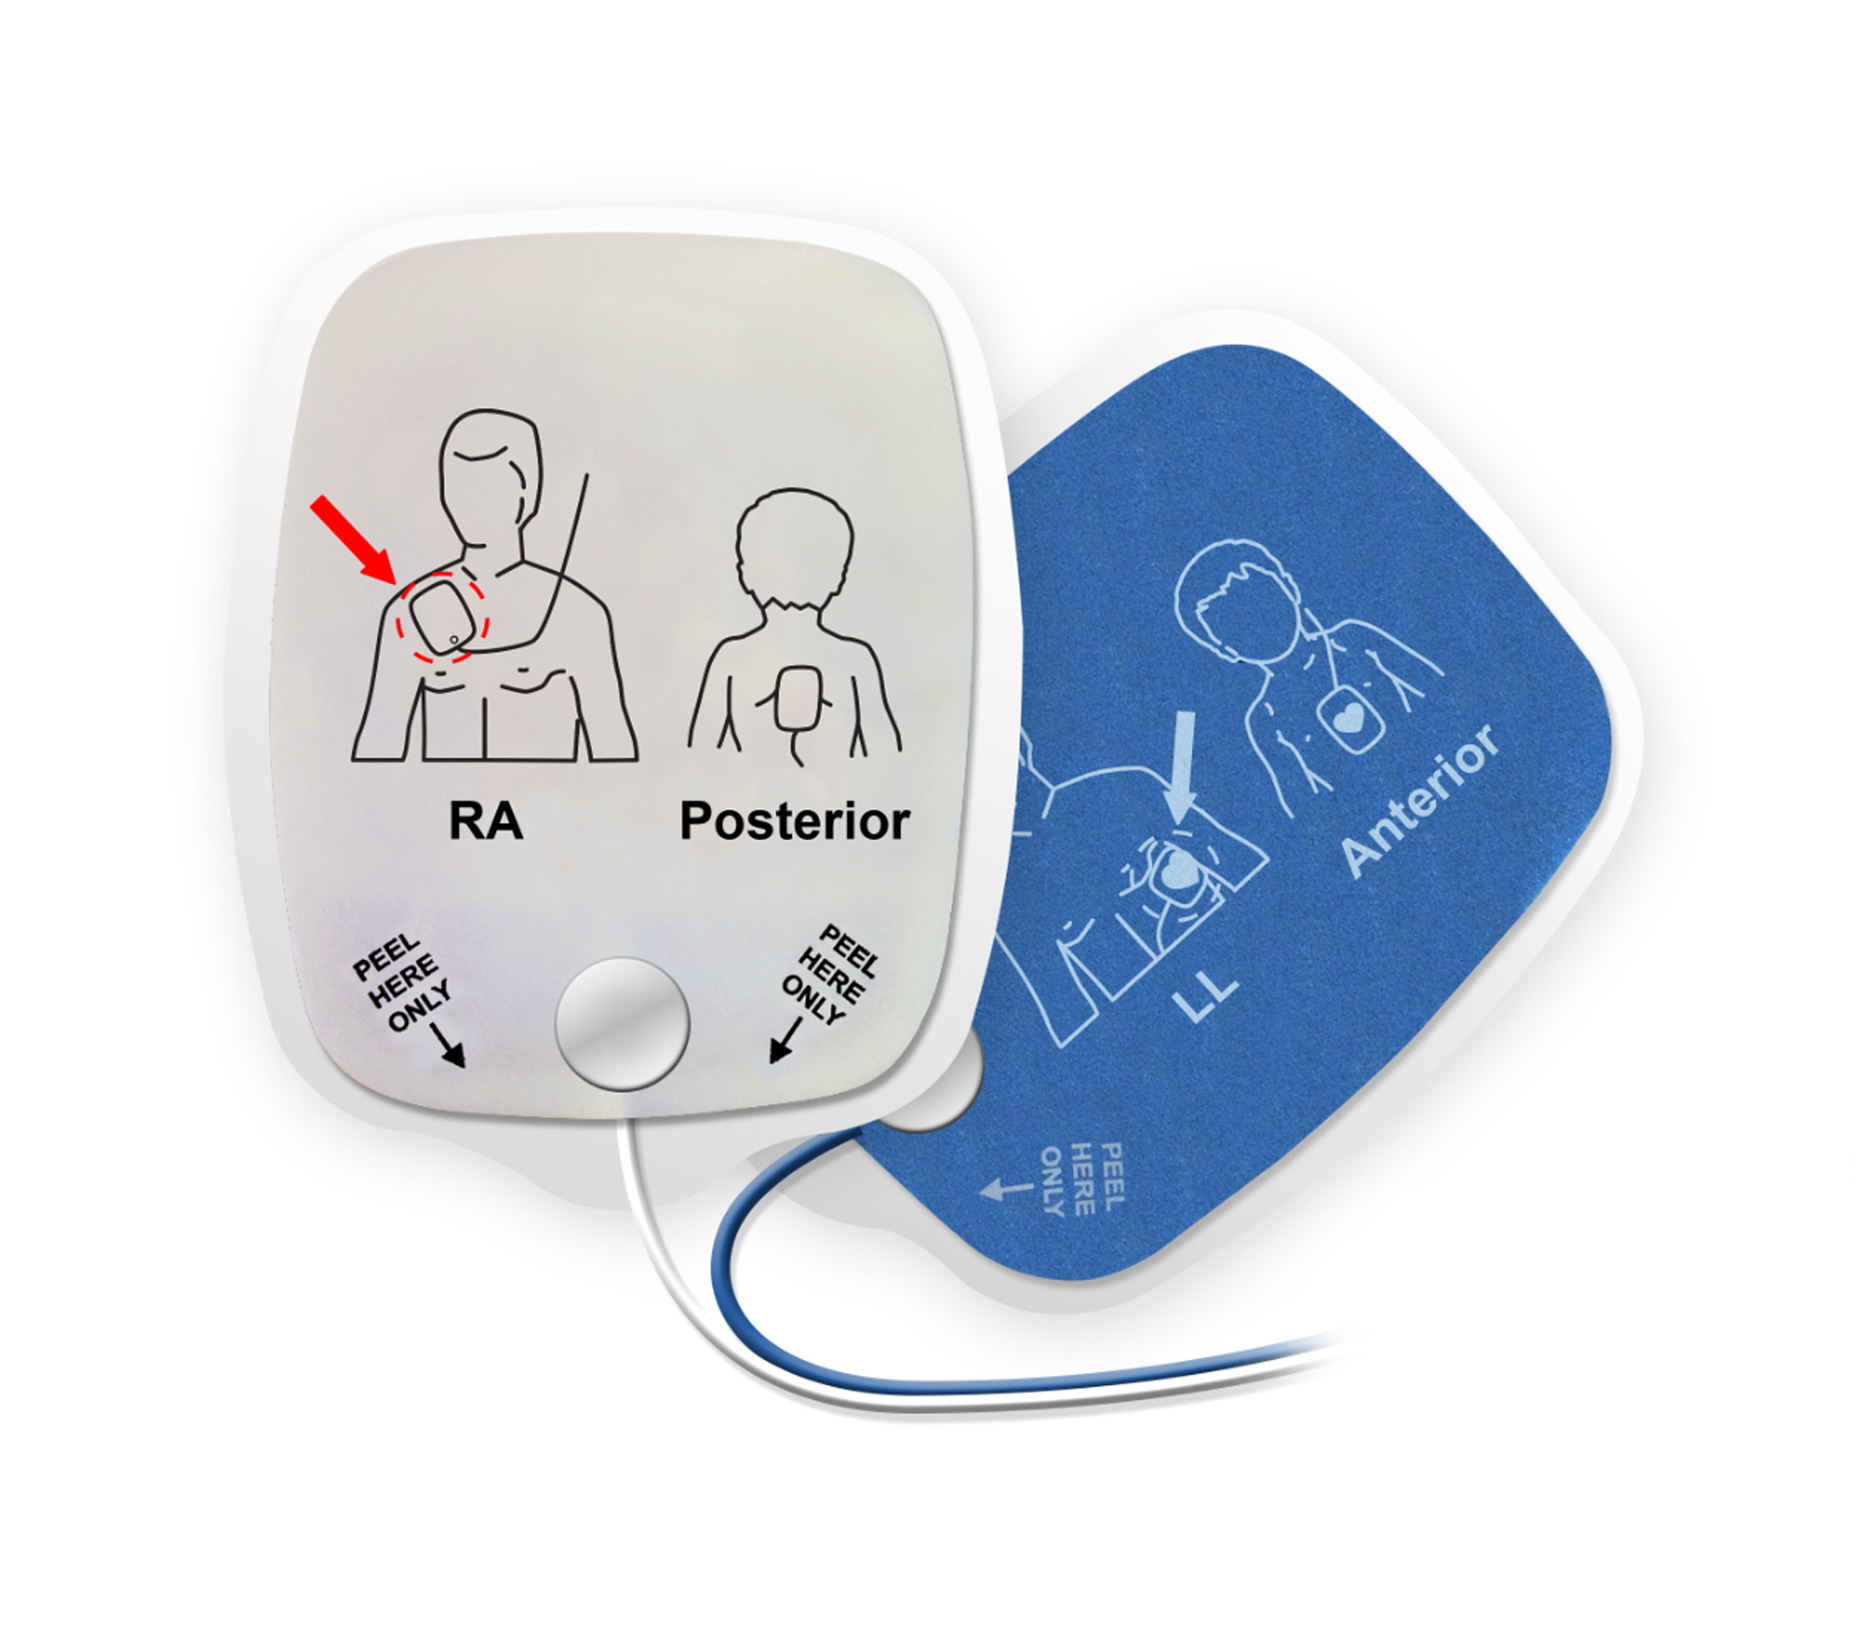 Defibrillation Pads and Electrodes